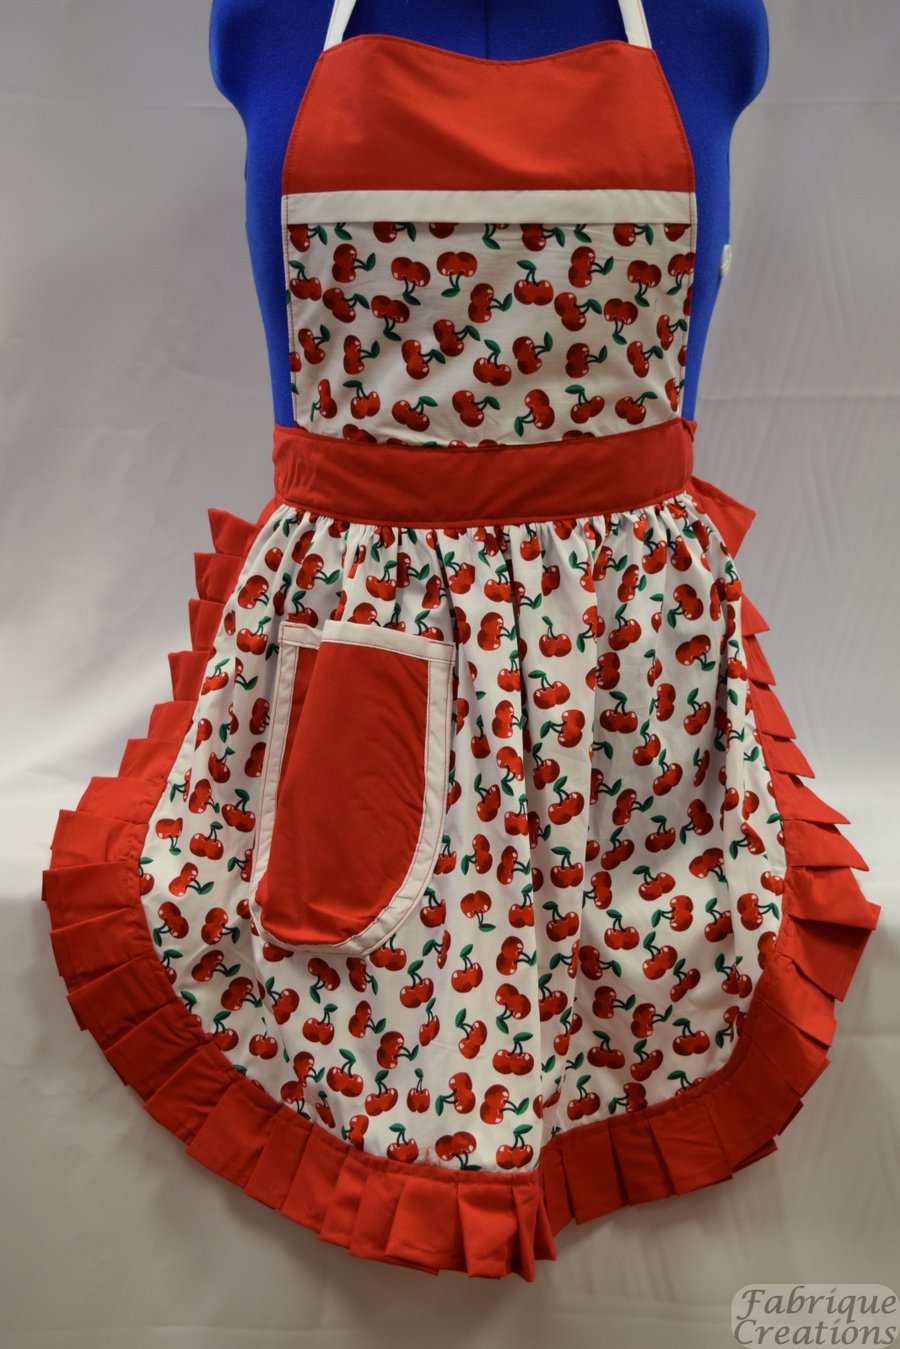 Vintage 50s Style Full Apron Pinny - White & Red - Cherries (Cherry)